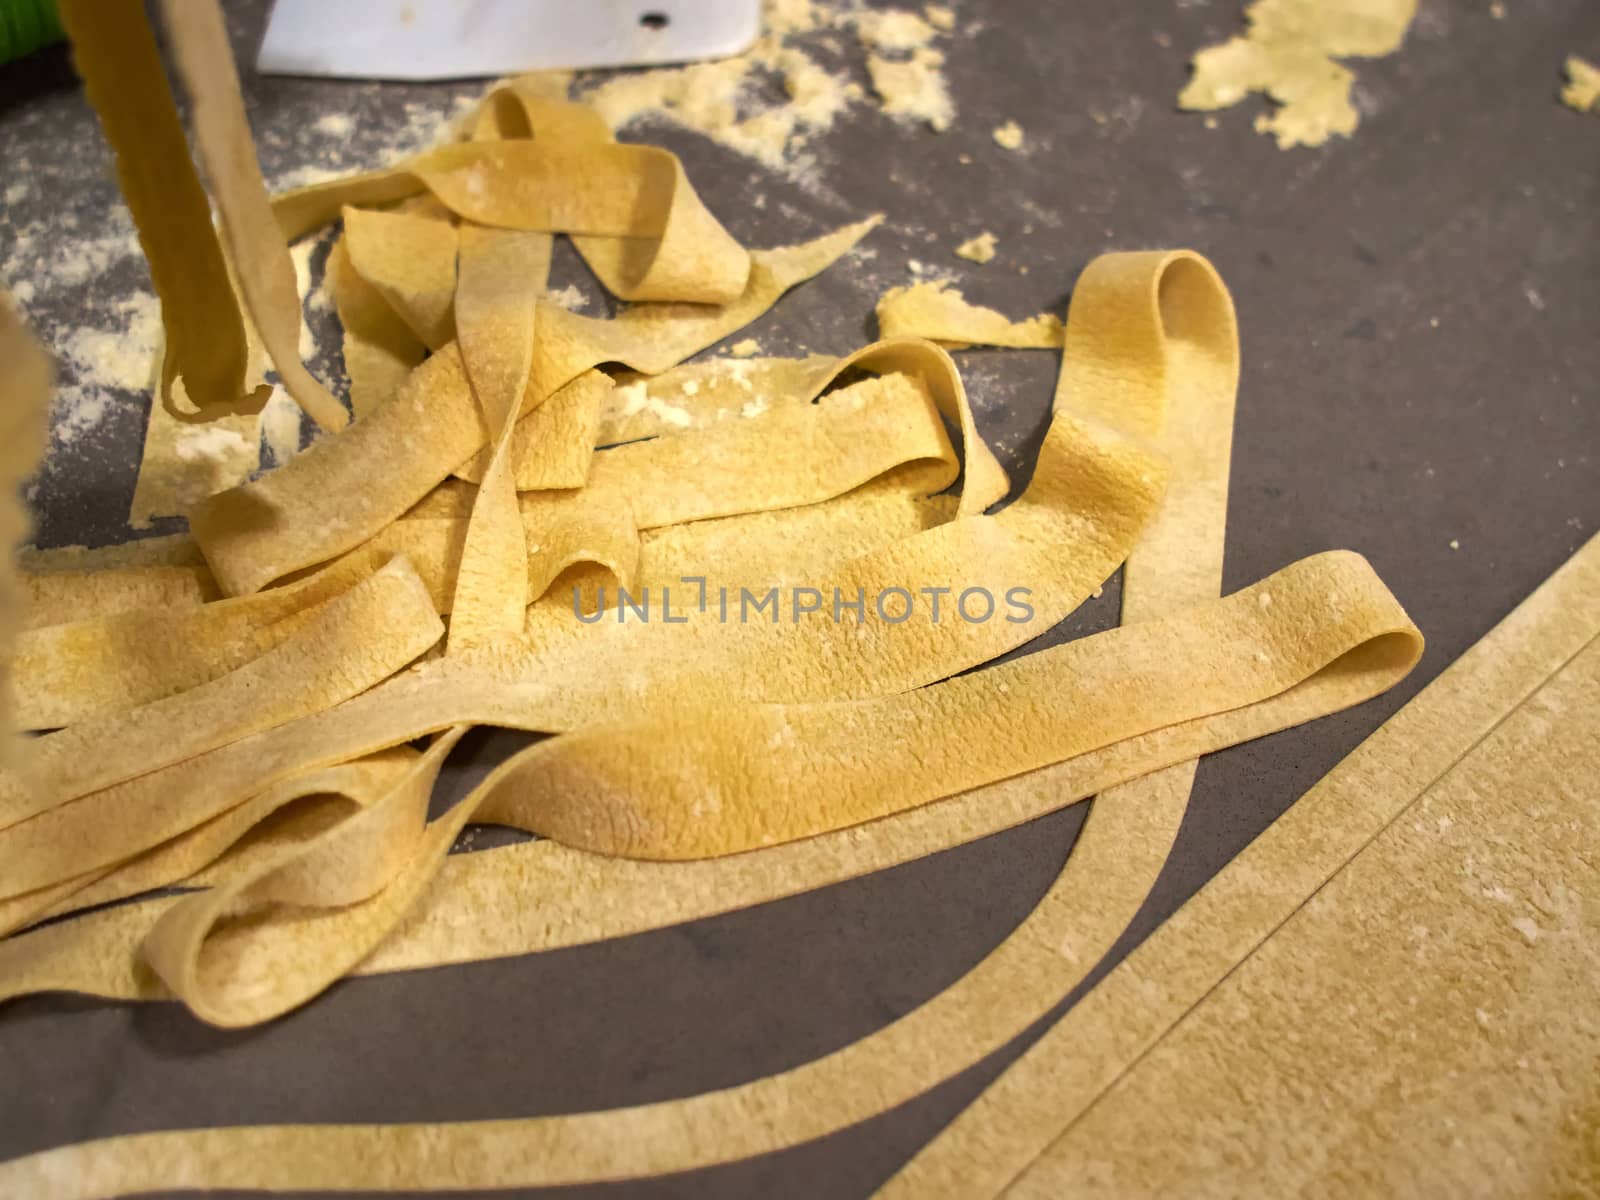 Close details of making traditional Italian homemade pasta noodles